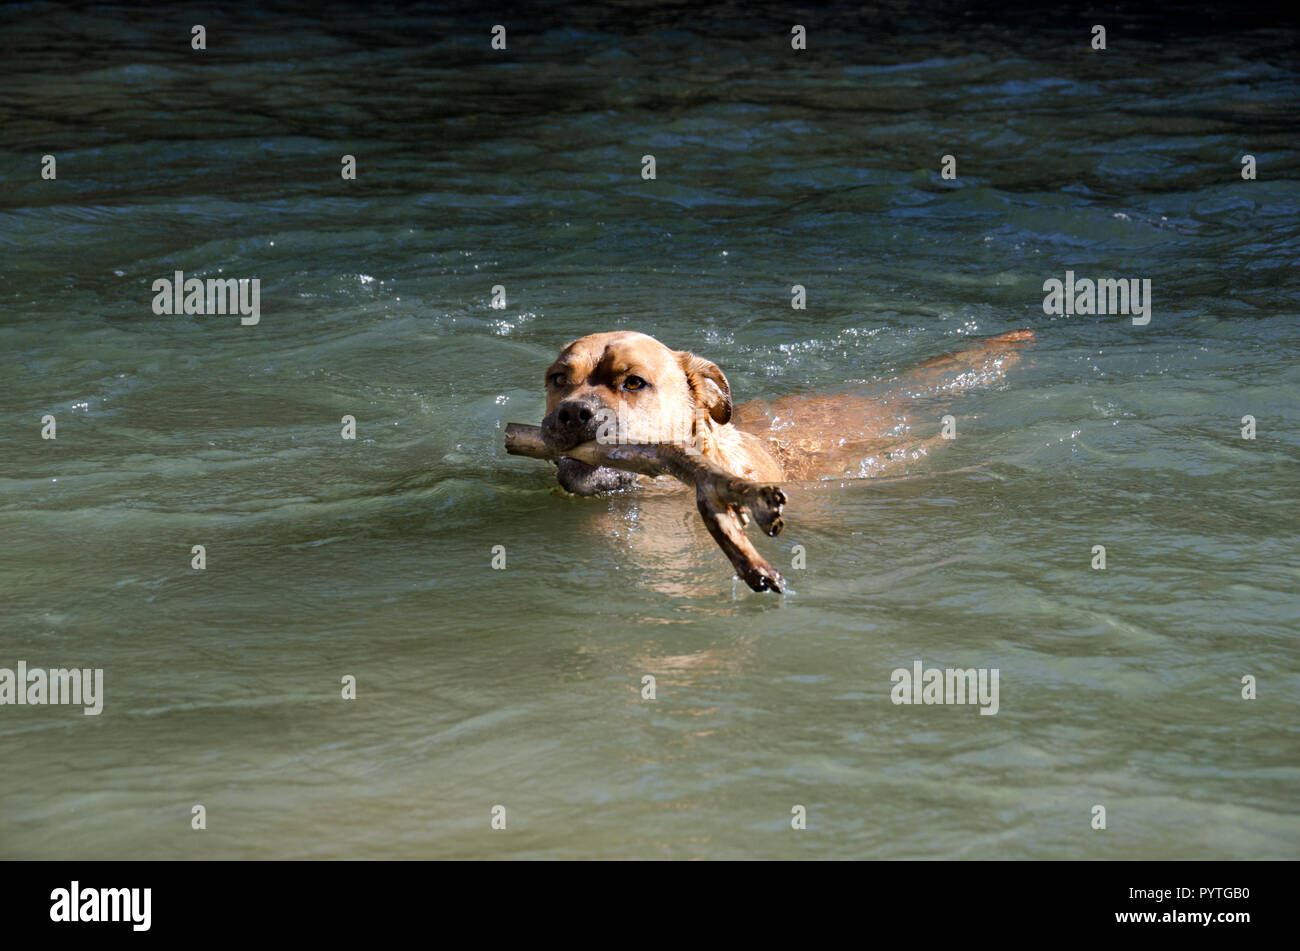 A boxer dog swimming and carrying a large stick Stock Photo